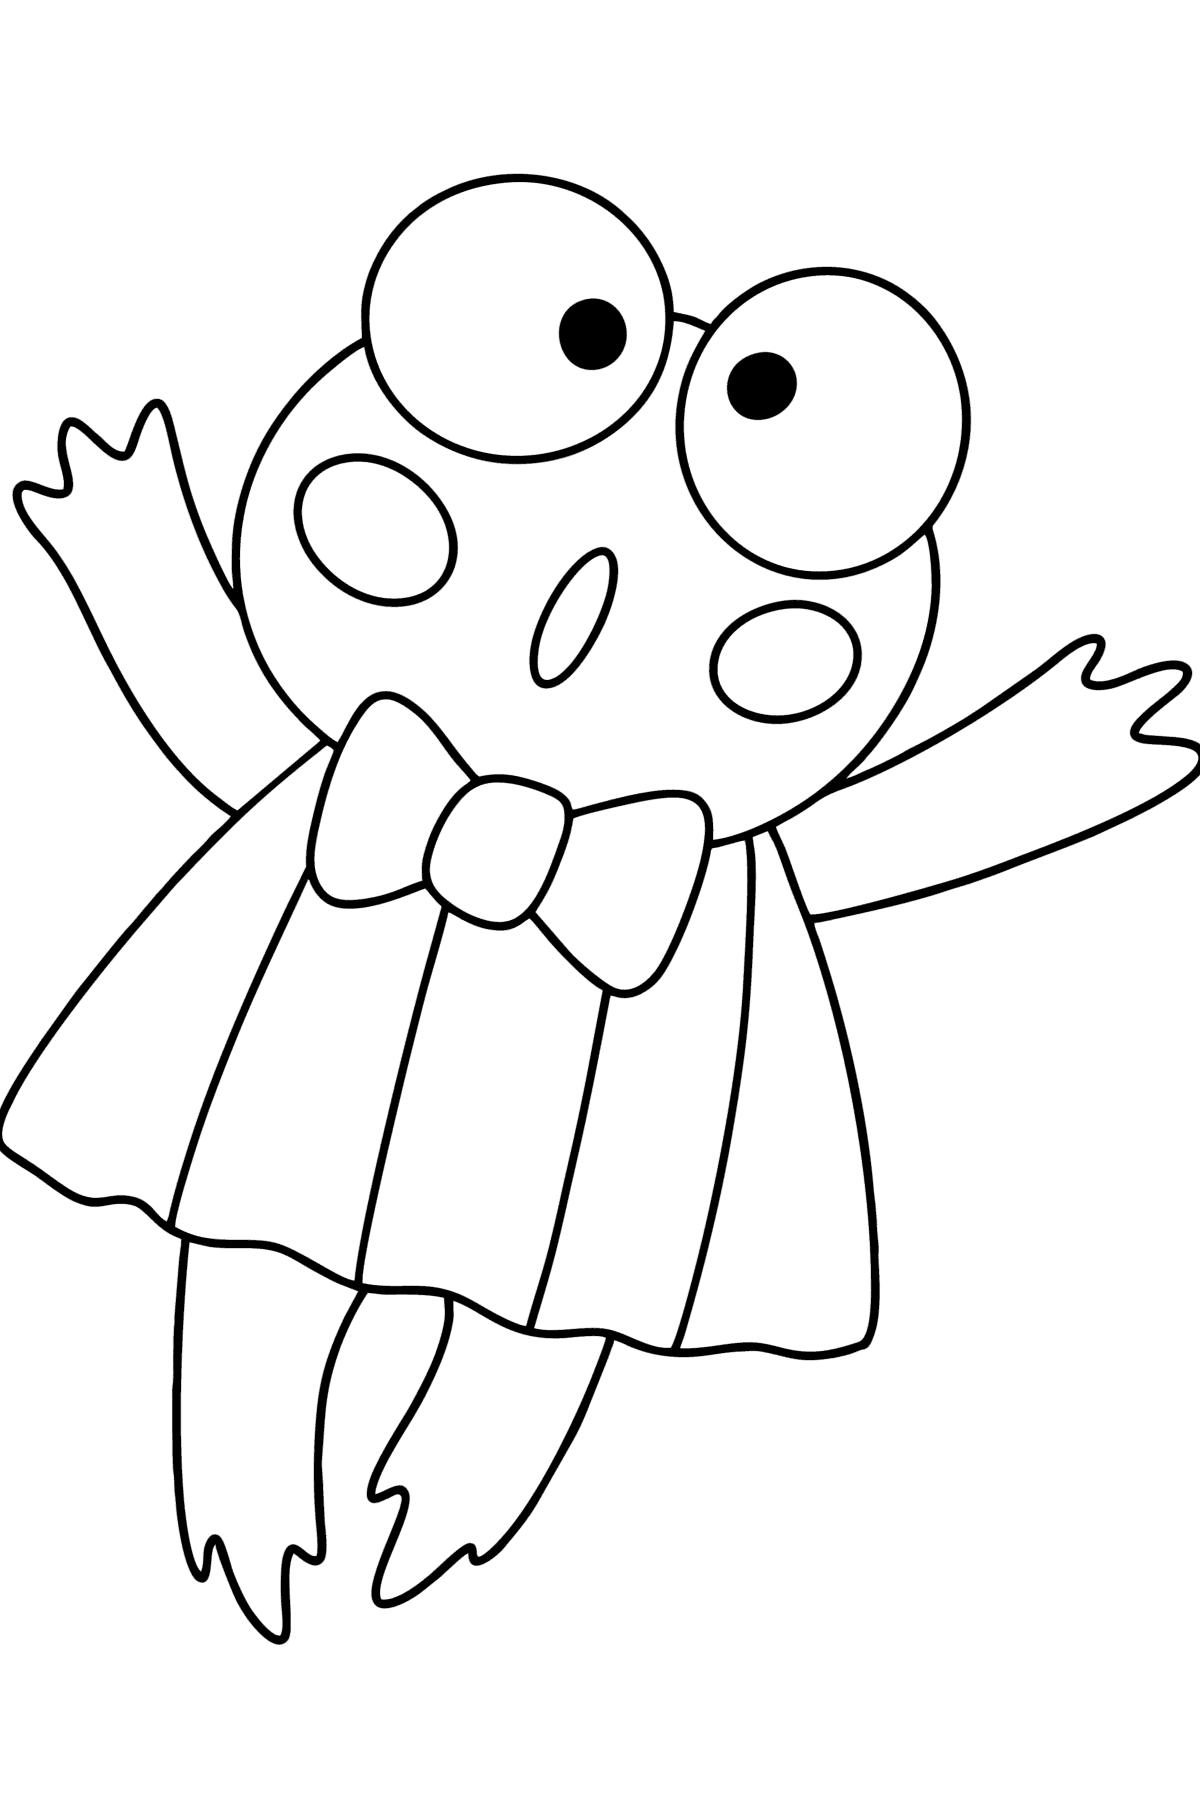 Hello Kitty Keroppi coloring page - Coloring Pages for Kids